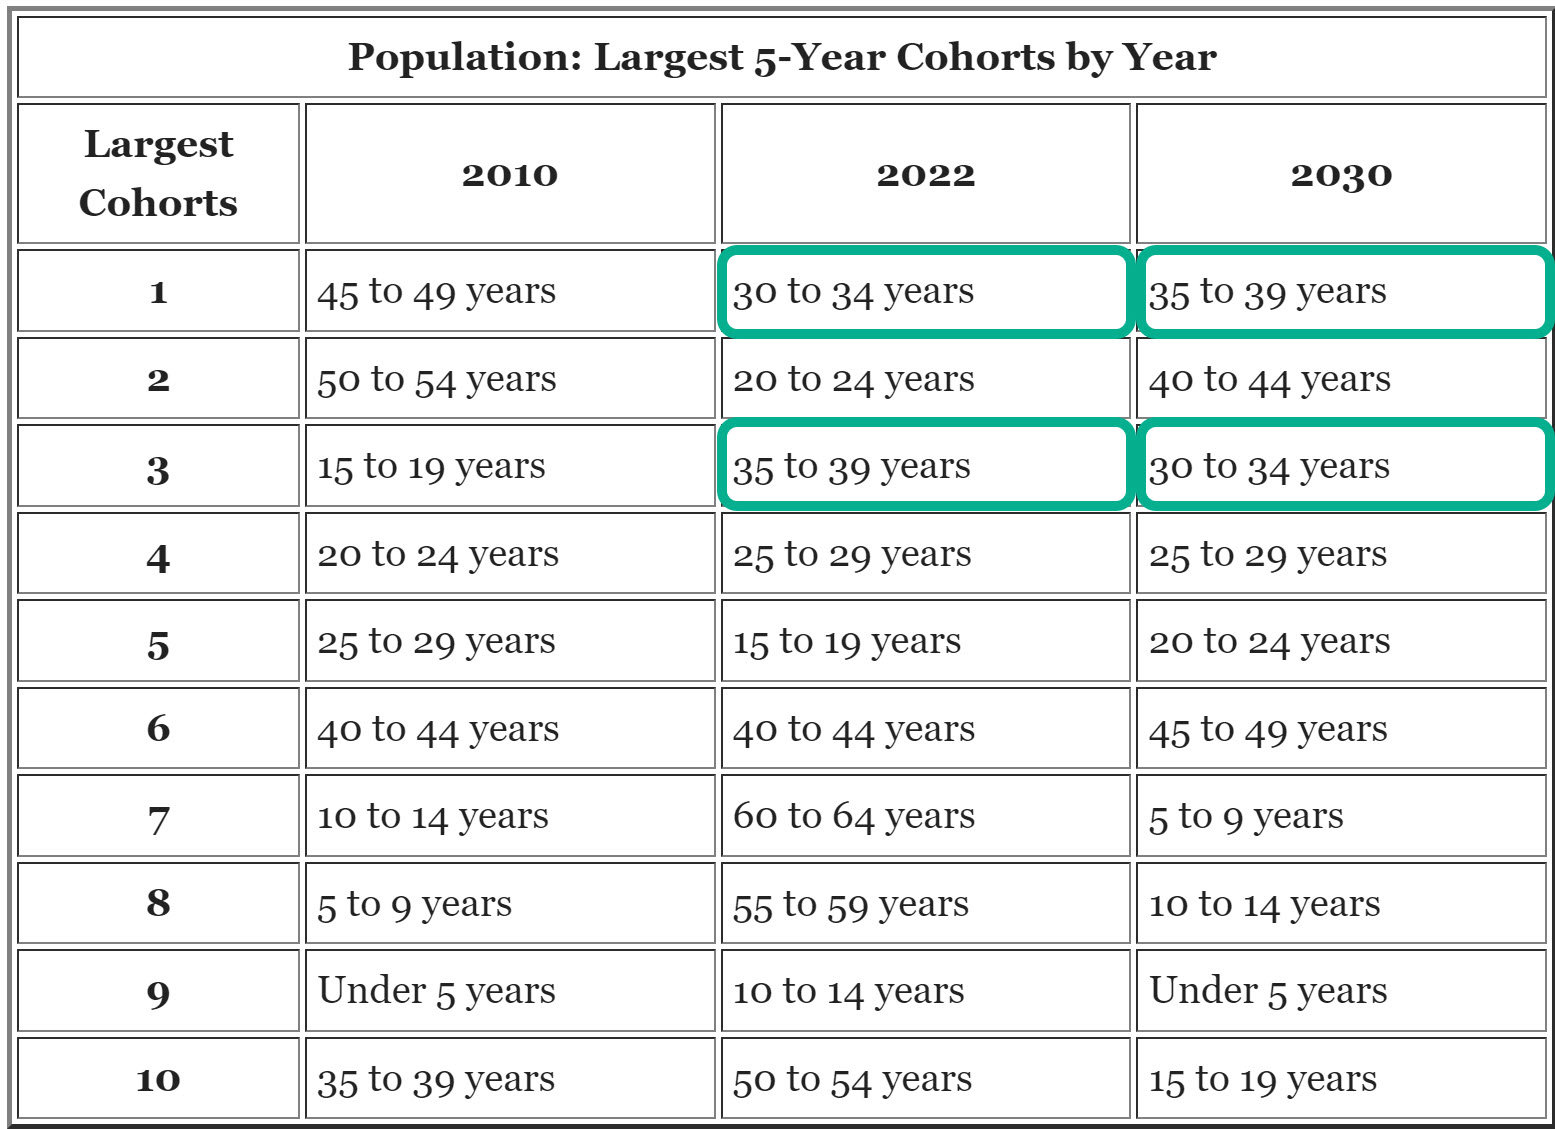 Largest Populations Groups by Year